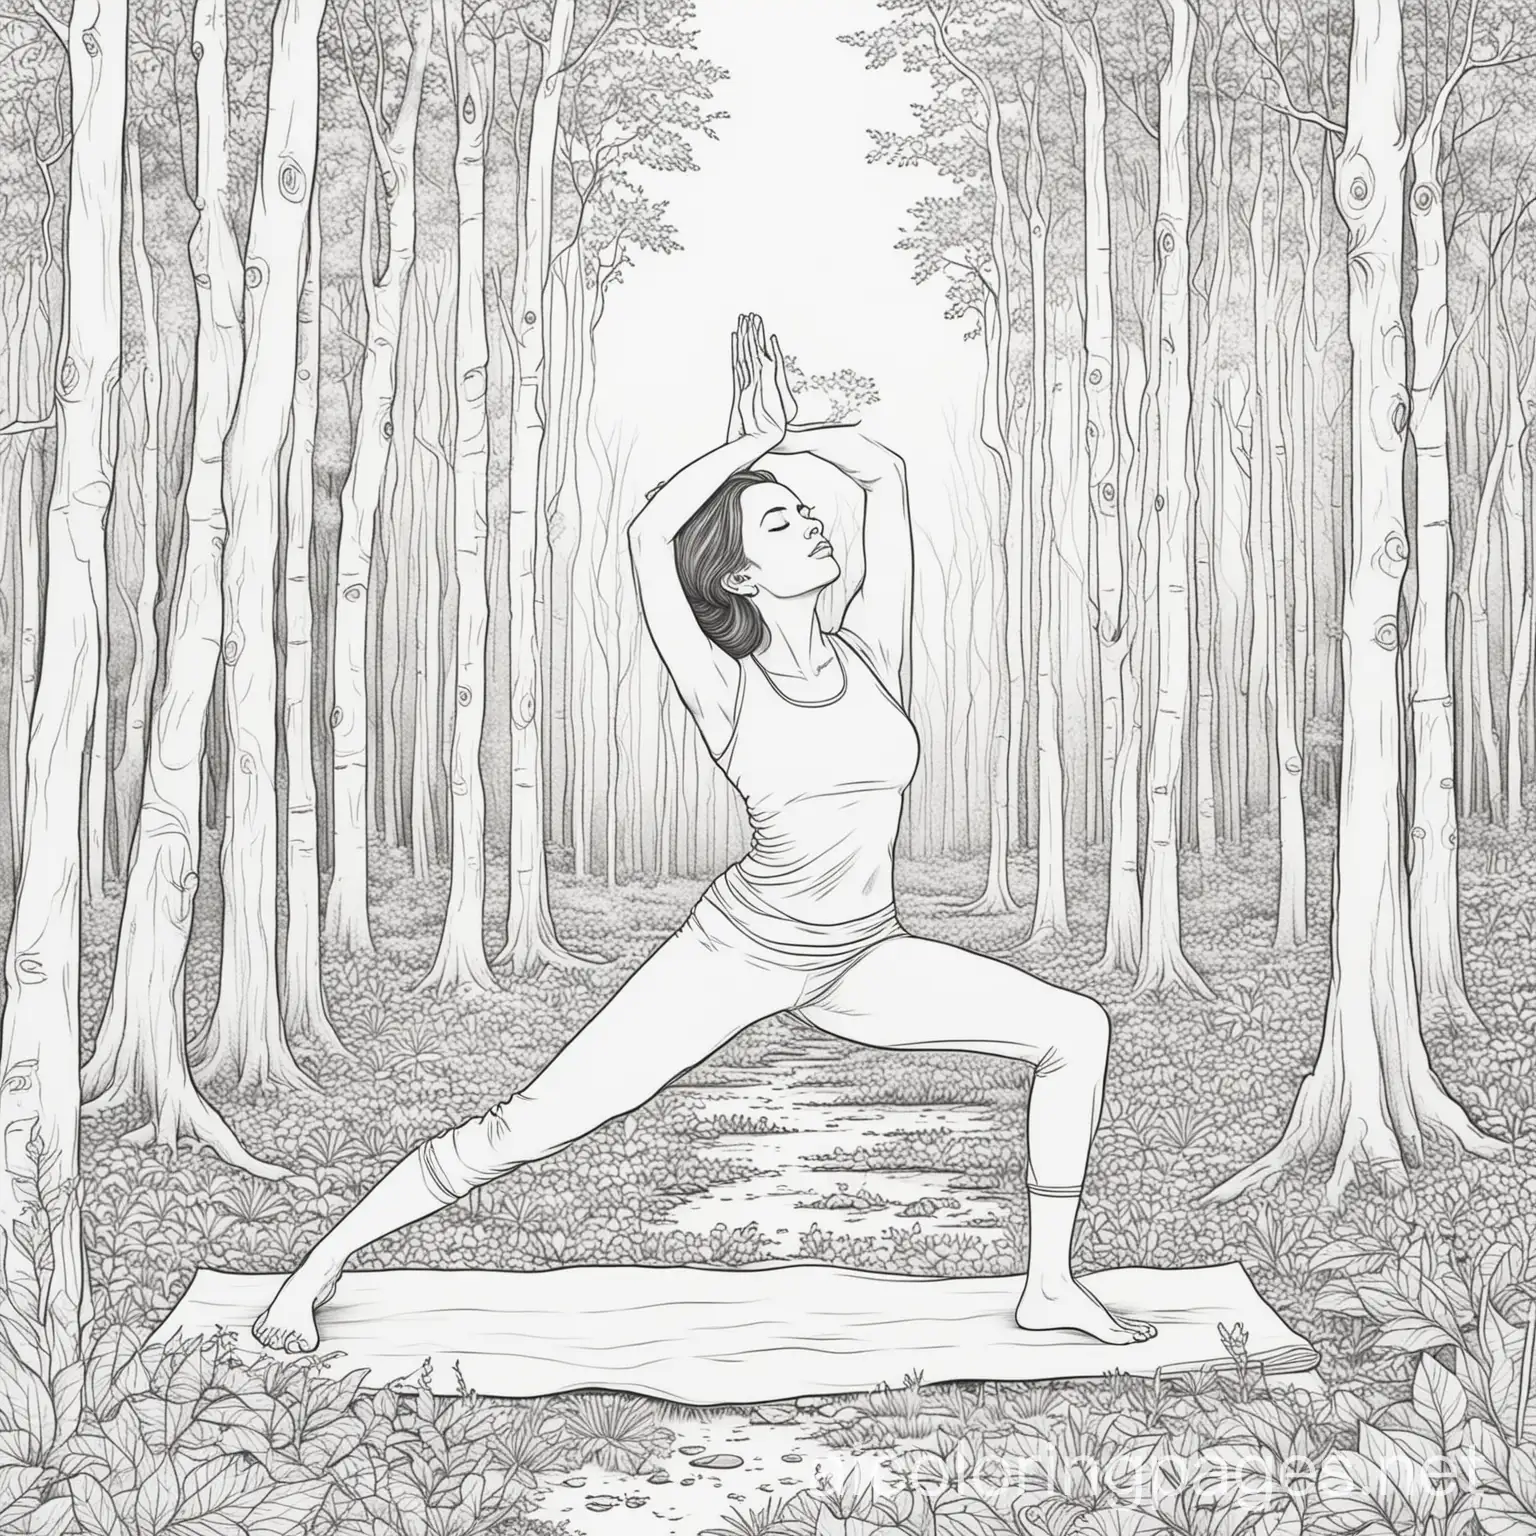 Woman-Doing-Yoga-in-Serene-Forest-Setting-Coloring-Page